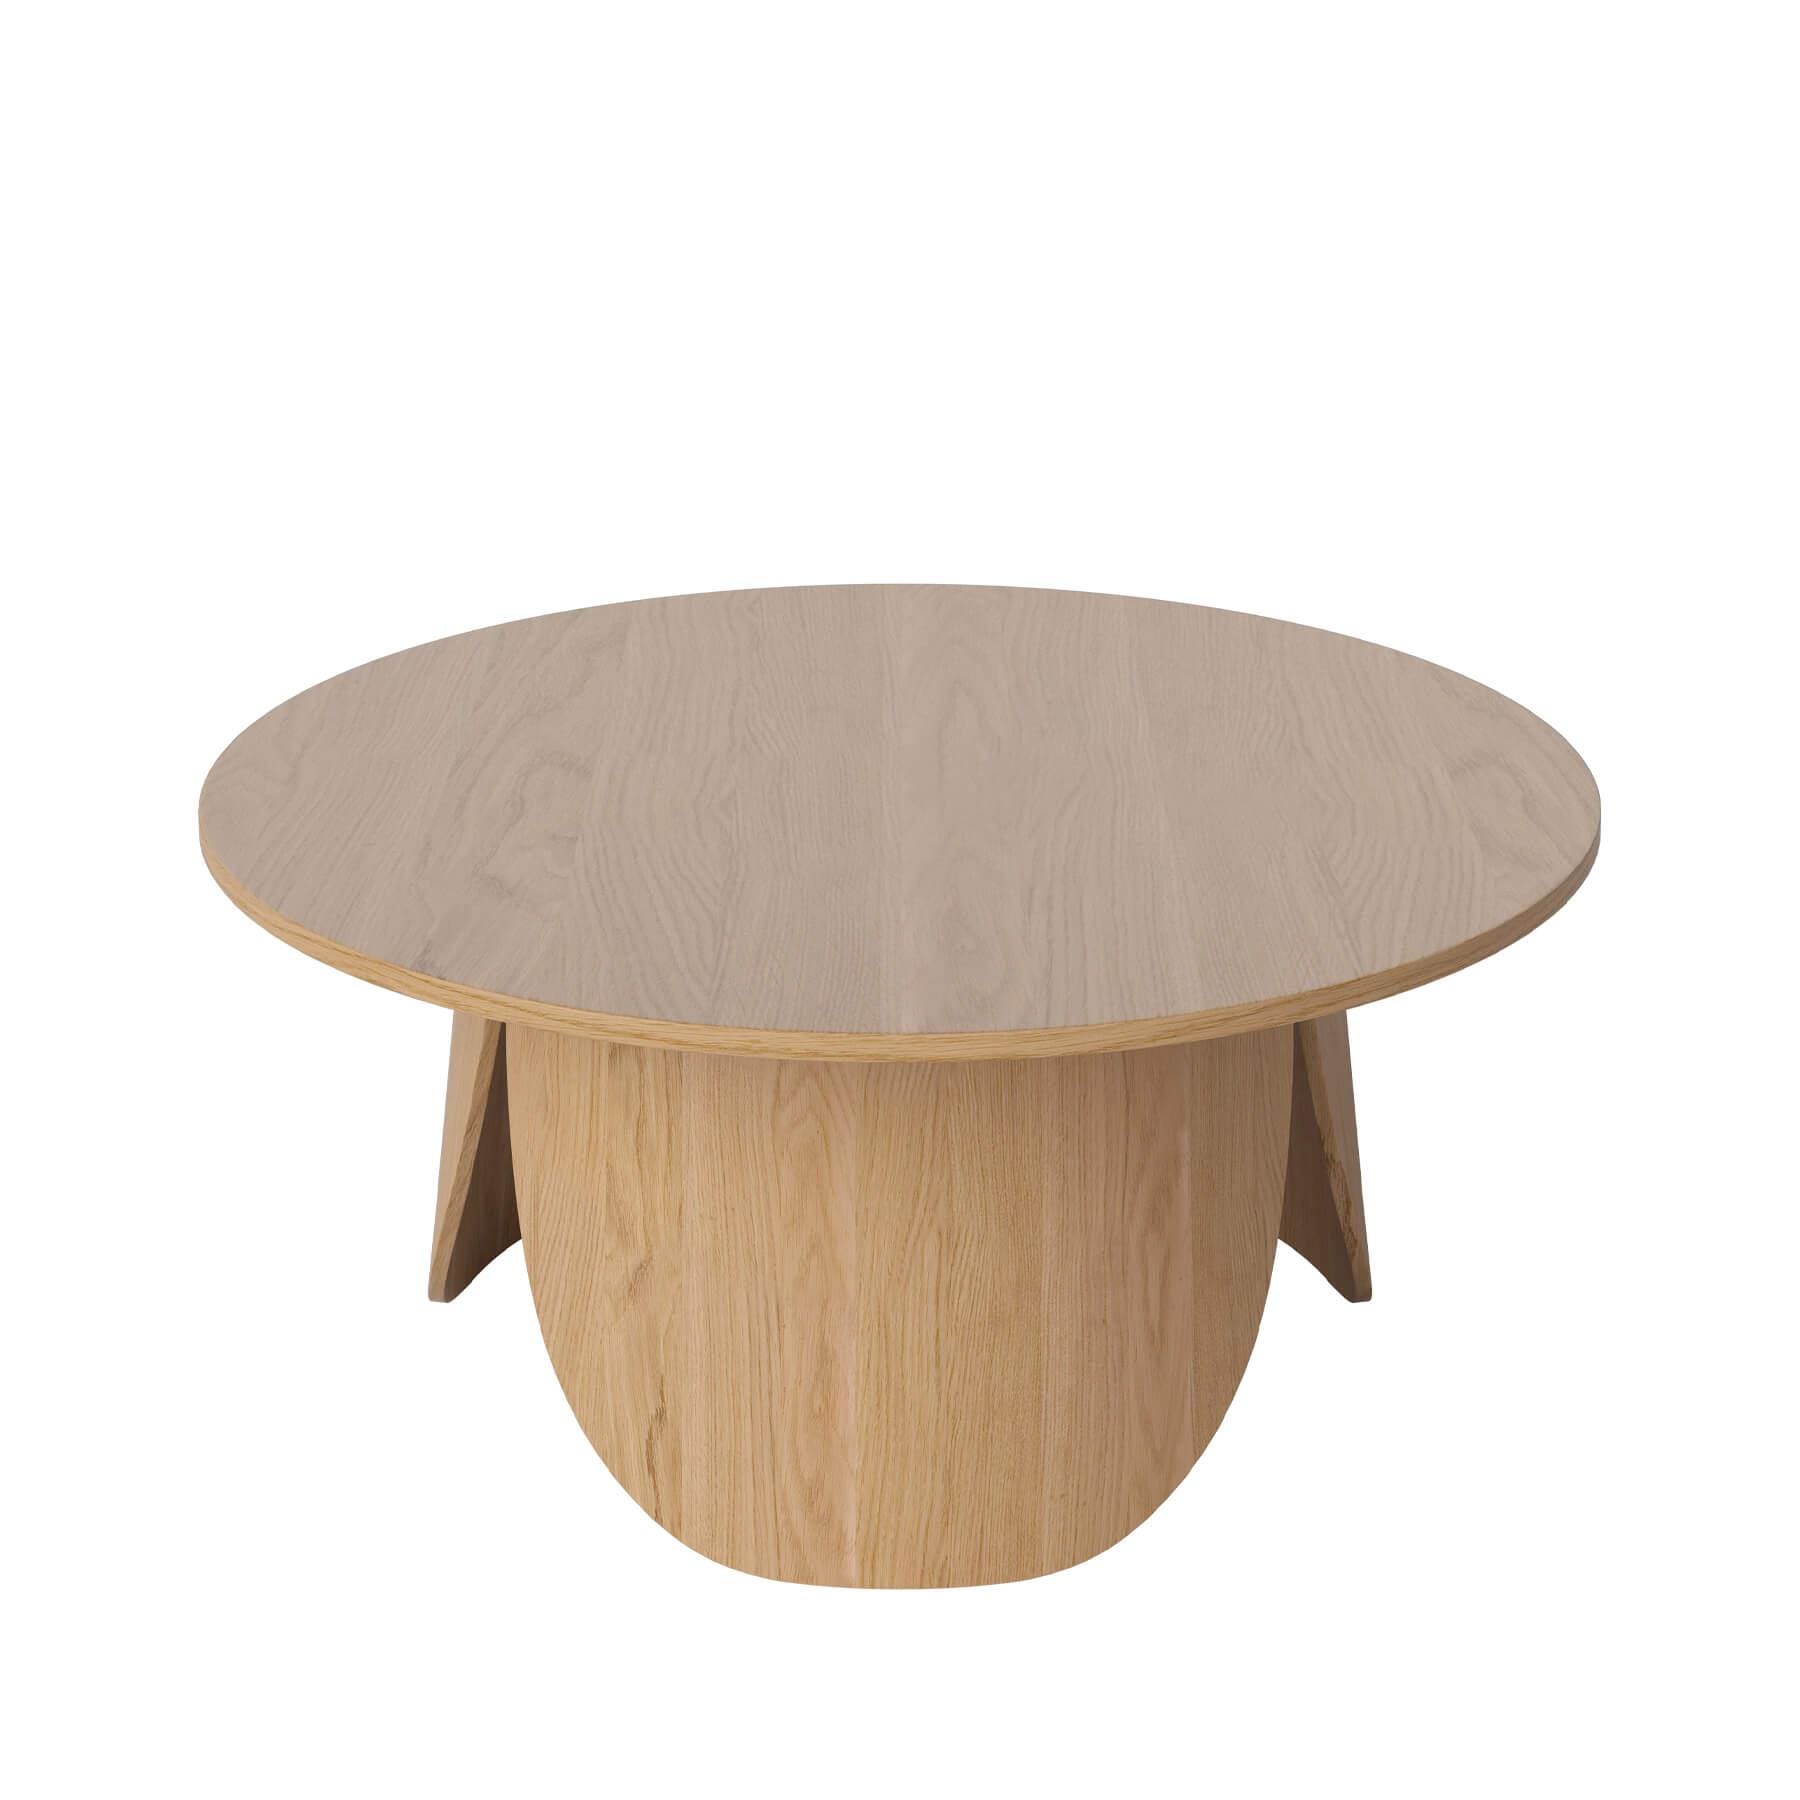 Bolia Peyote Coffee Table Large Low Lacquered Oak Light Wood Designer Furniture From Holloways Of Ludlow